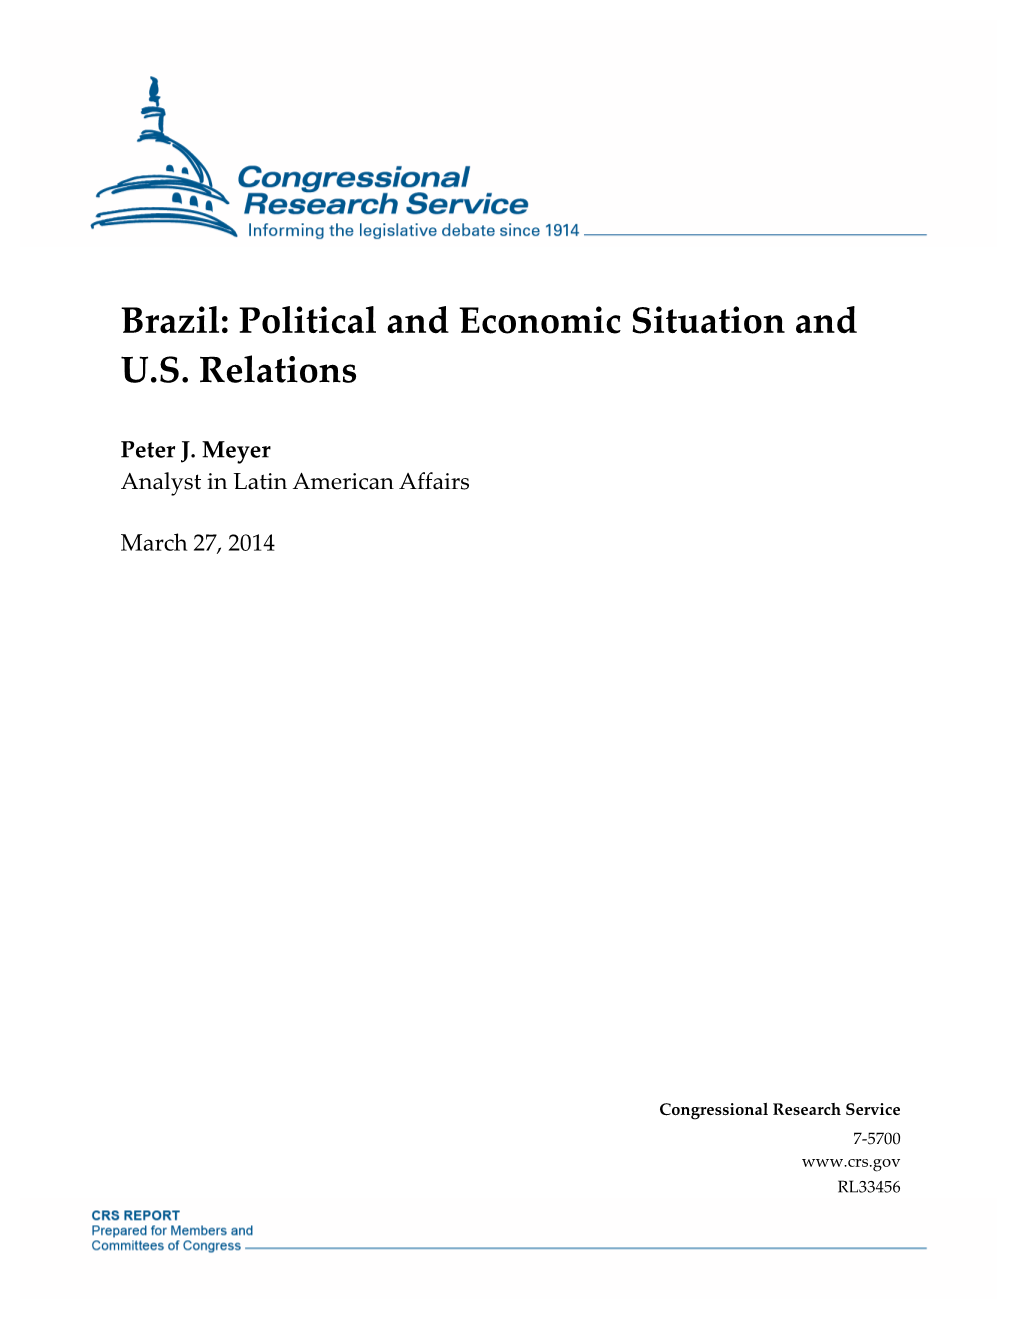 Brazil: Political and Economic Situation and U.S